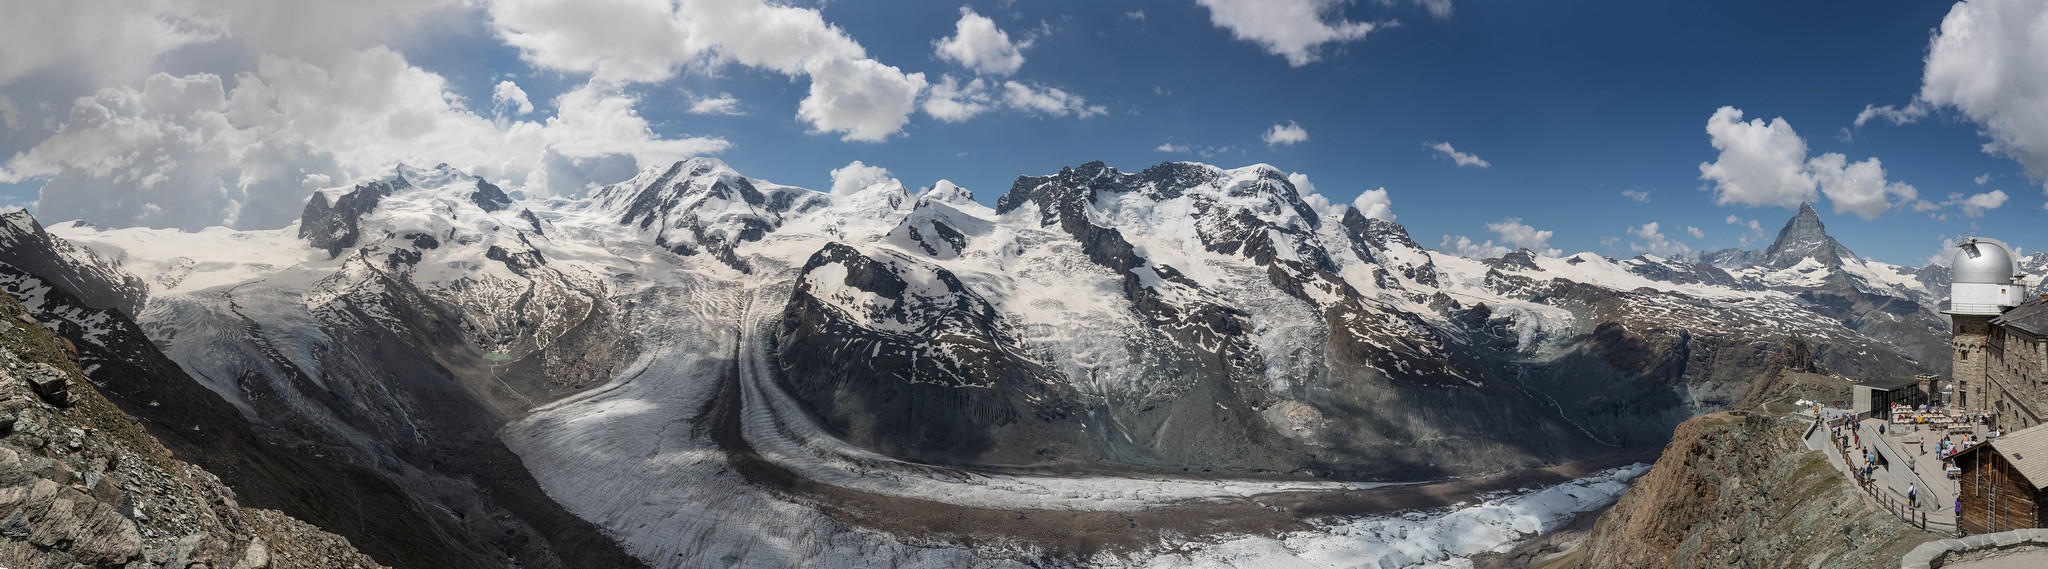 Looking down on the Gorner glacier, in 2019